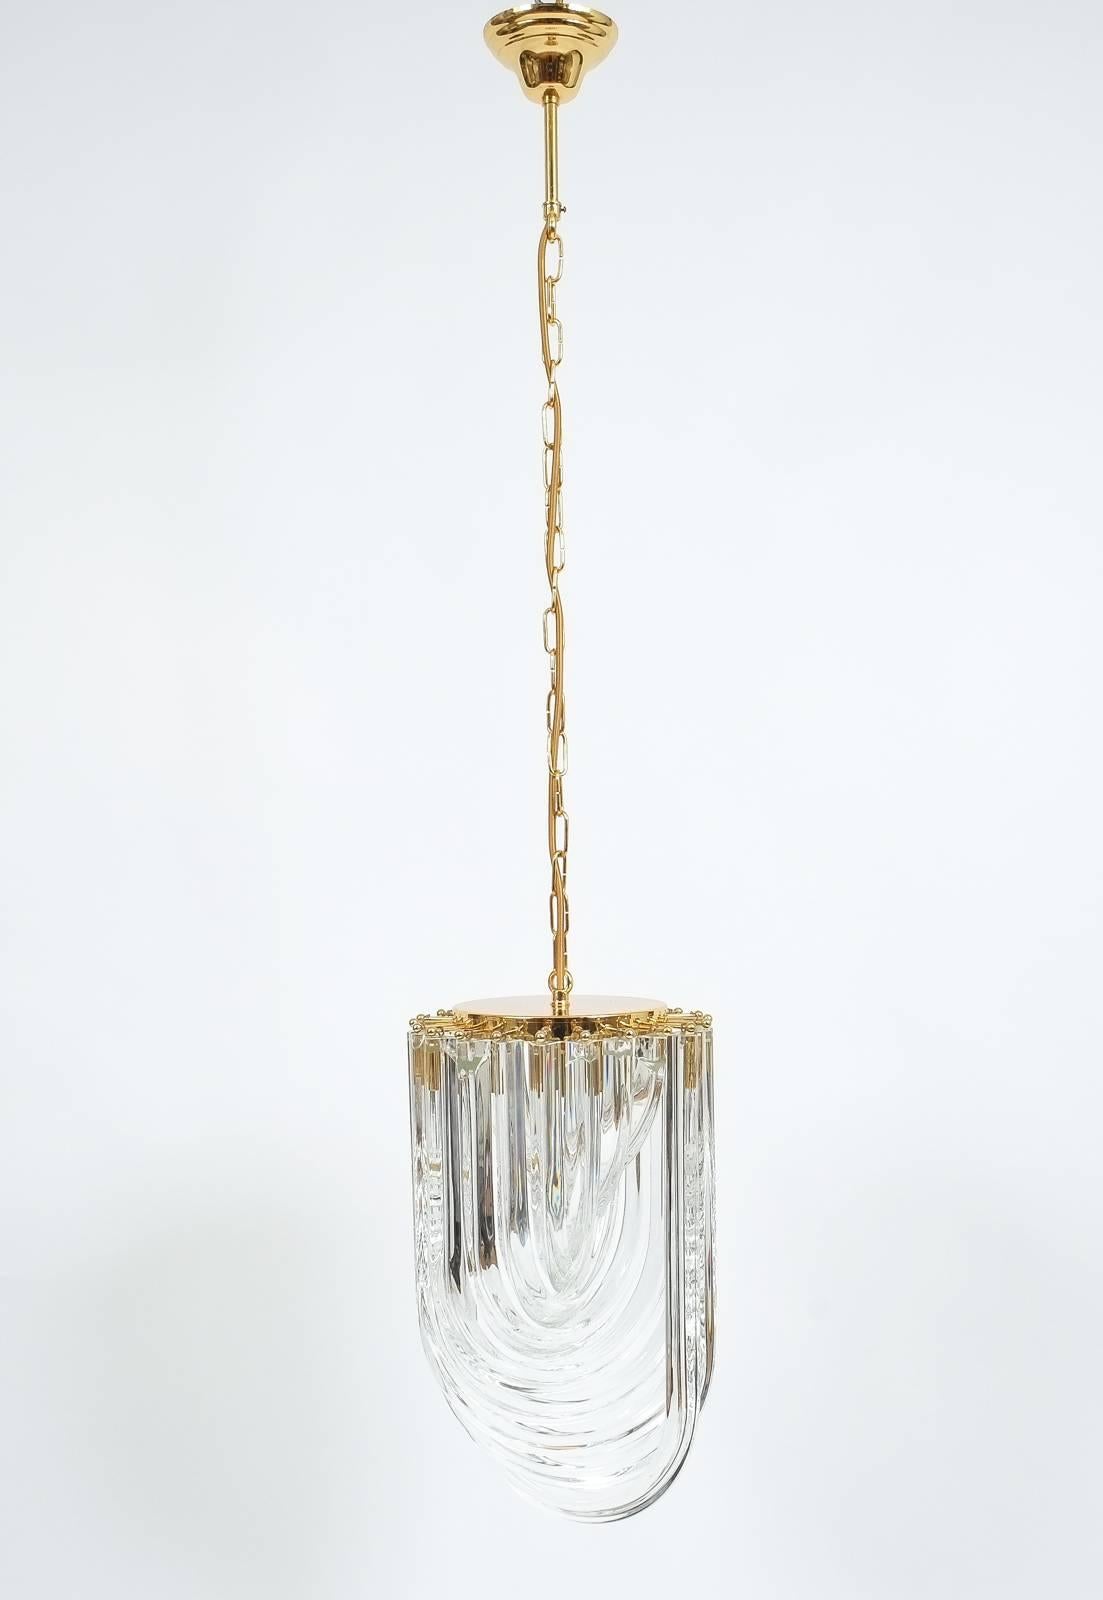 One of Three Venini Curved Crystal Glass Gilt Brass Chandelier In Good Condition For Sale In Vienna, AT